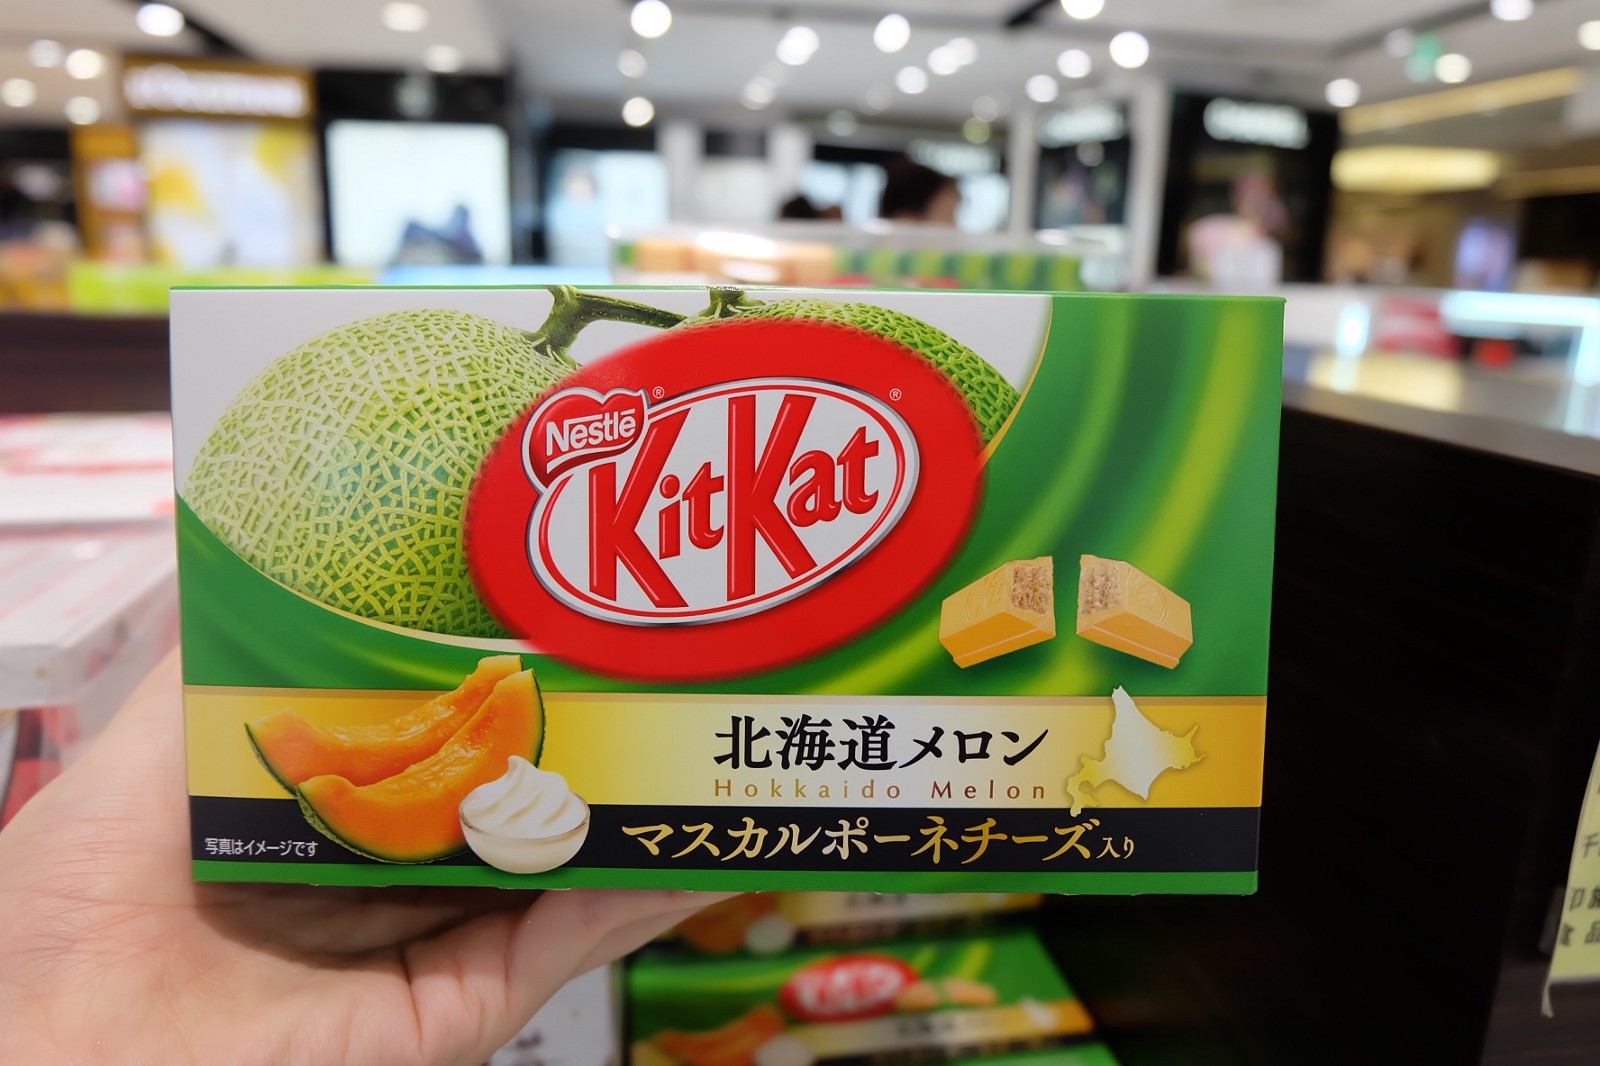 Limited KitKat with Hokkaido Melon and Mascarpone Cheese flavour